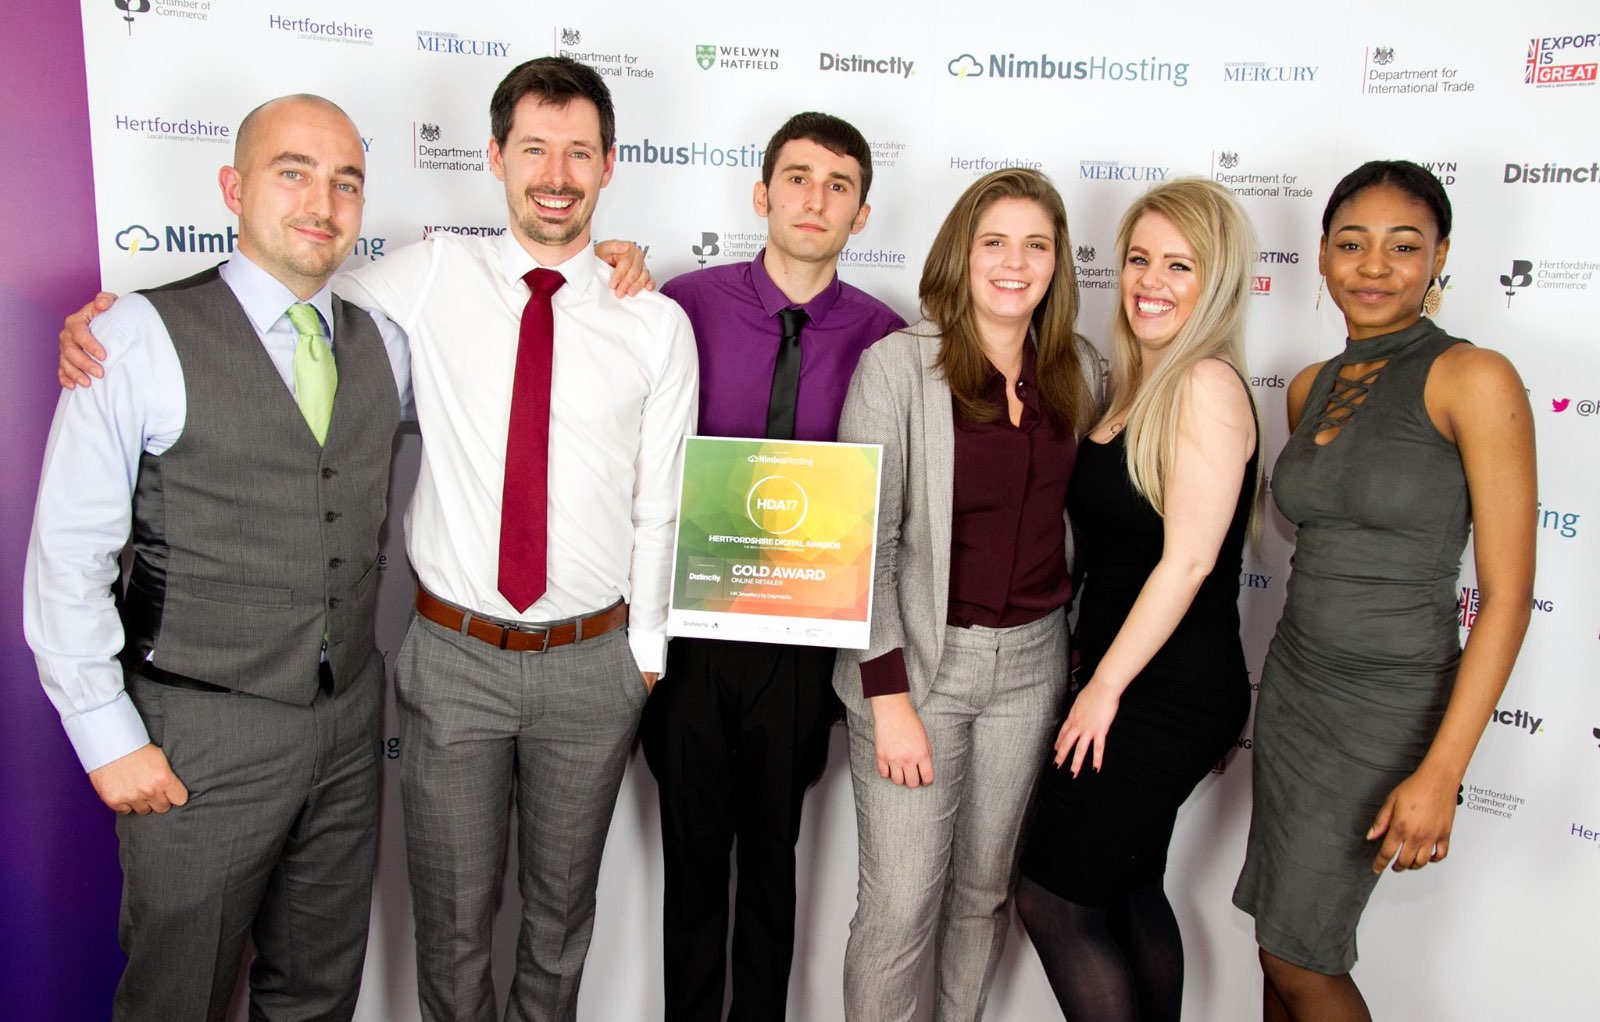 Photo of the Daymedia team at the Herts Digital Awards